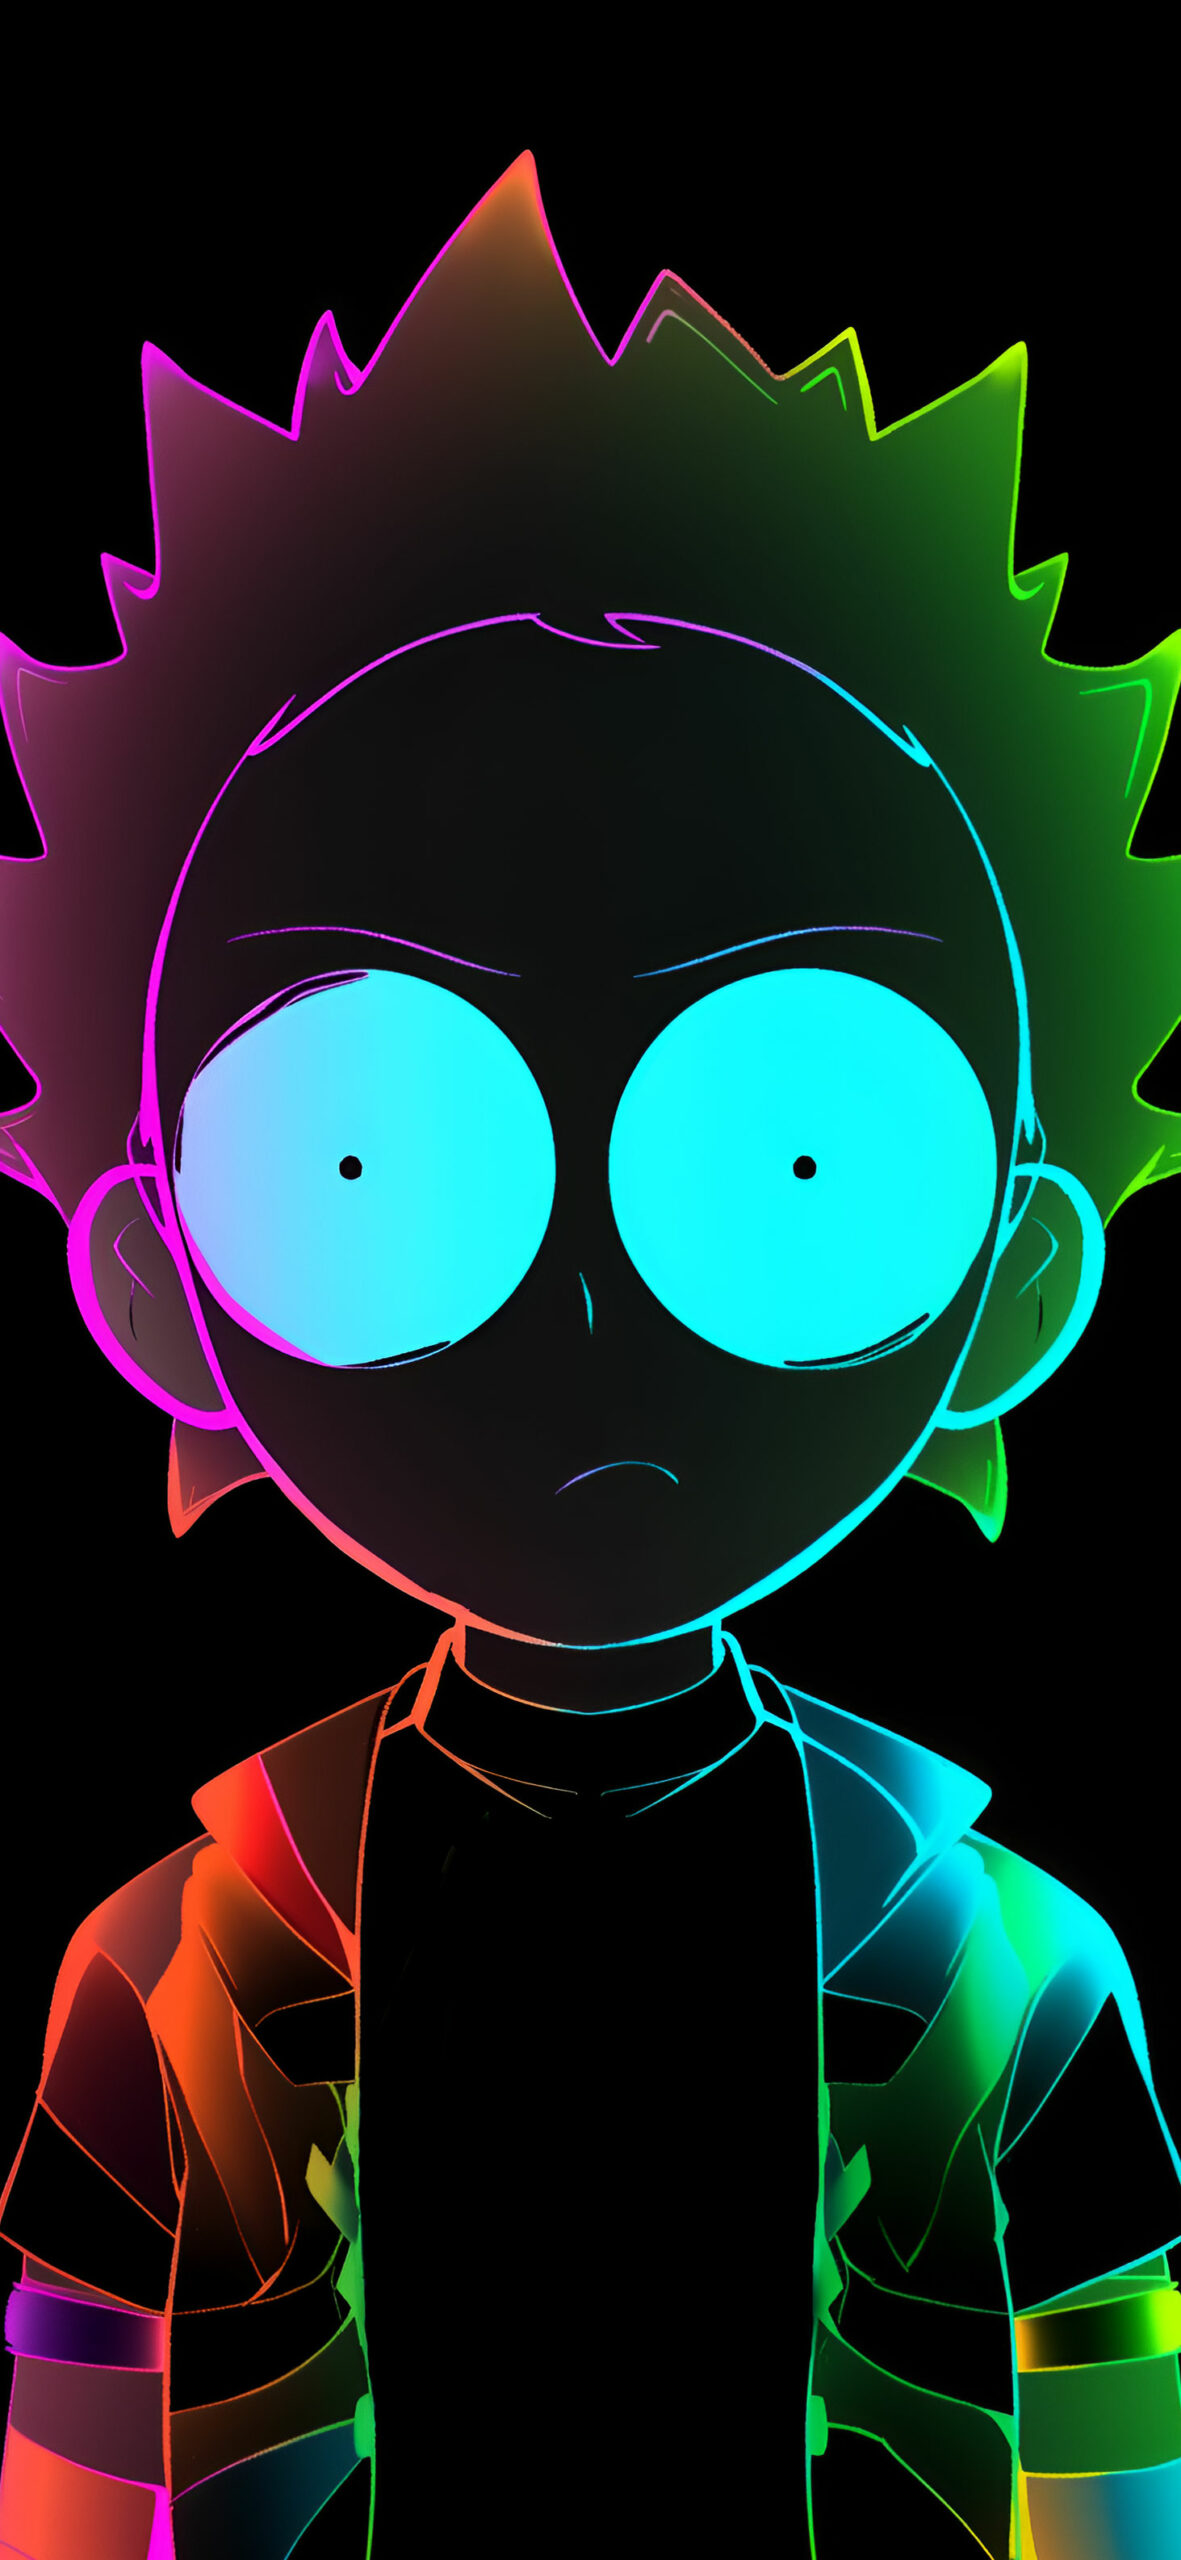 Zany morty smith neon wallpaper Cool rick and morty wallpaper